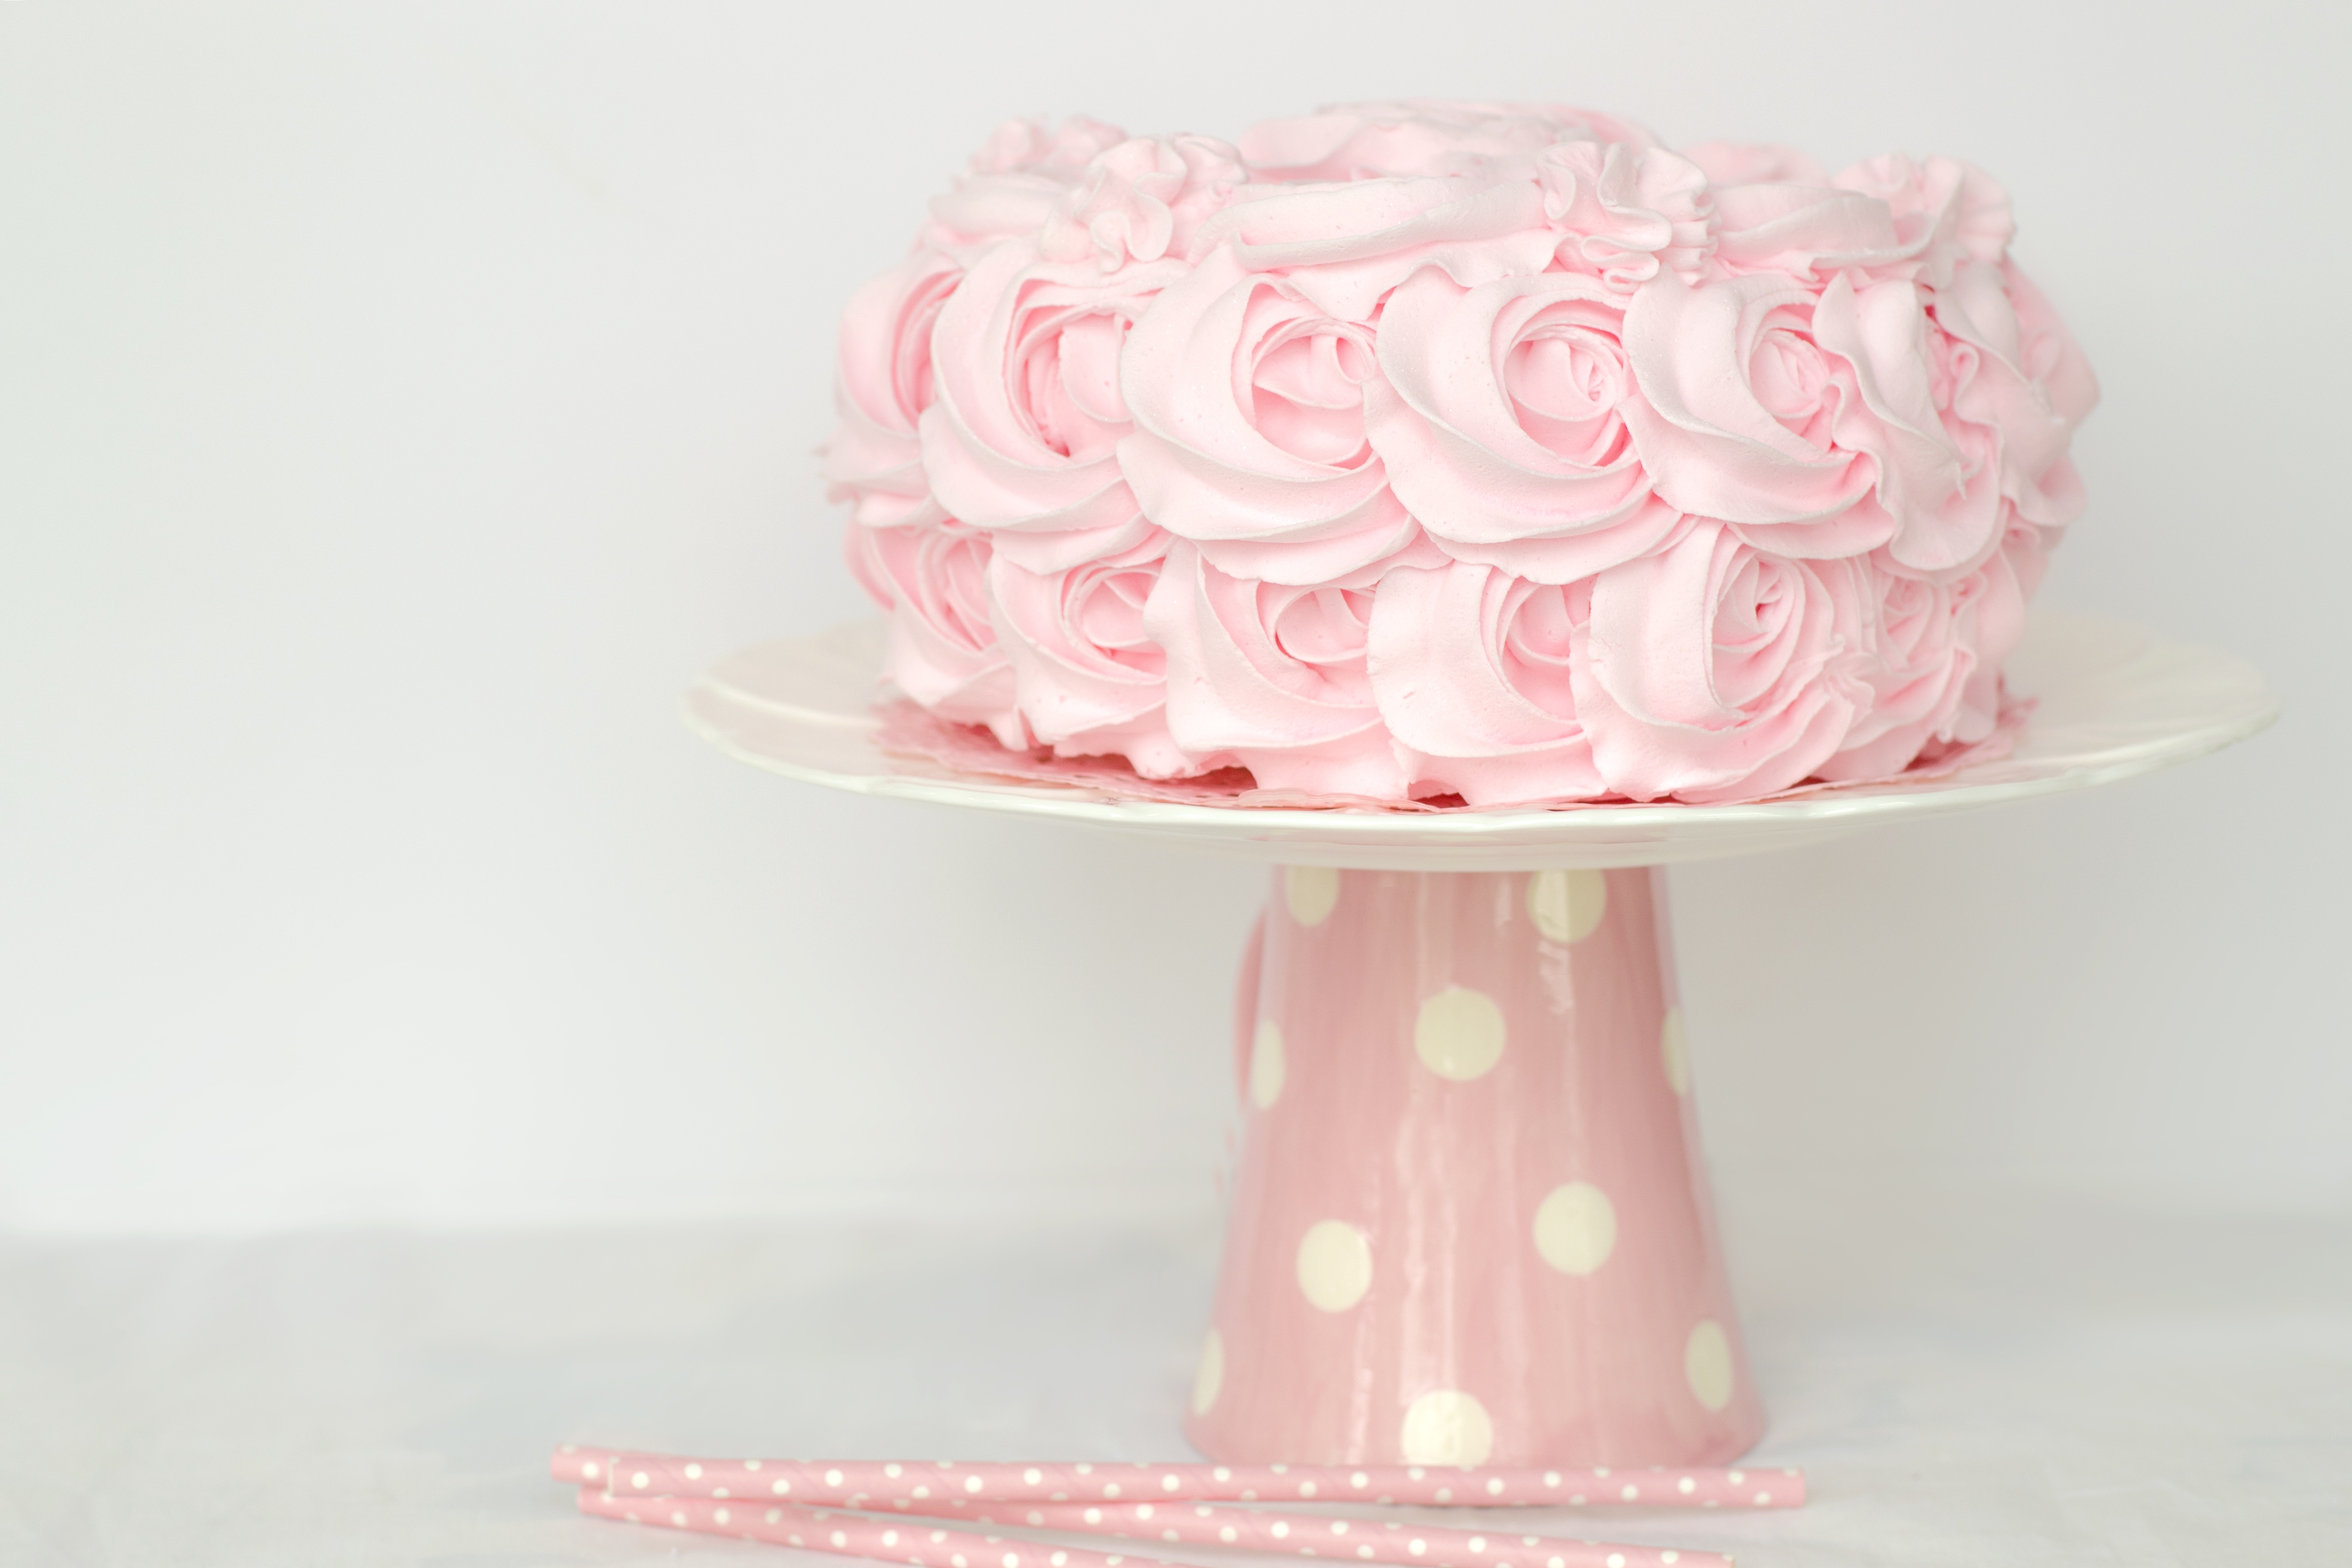 Free photo Delicious cake decorated with cream in the form of roses